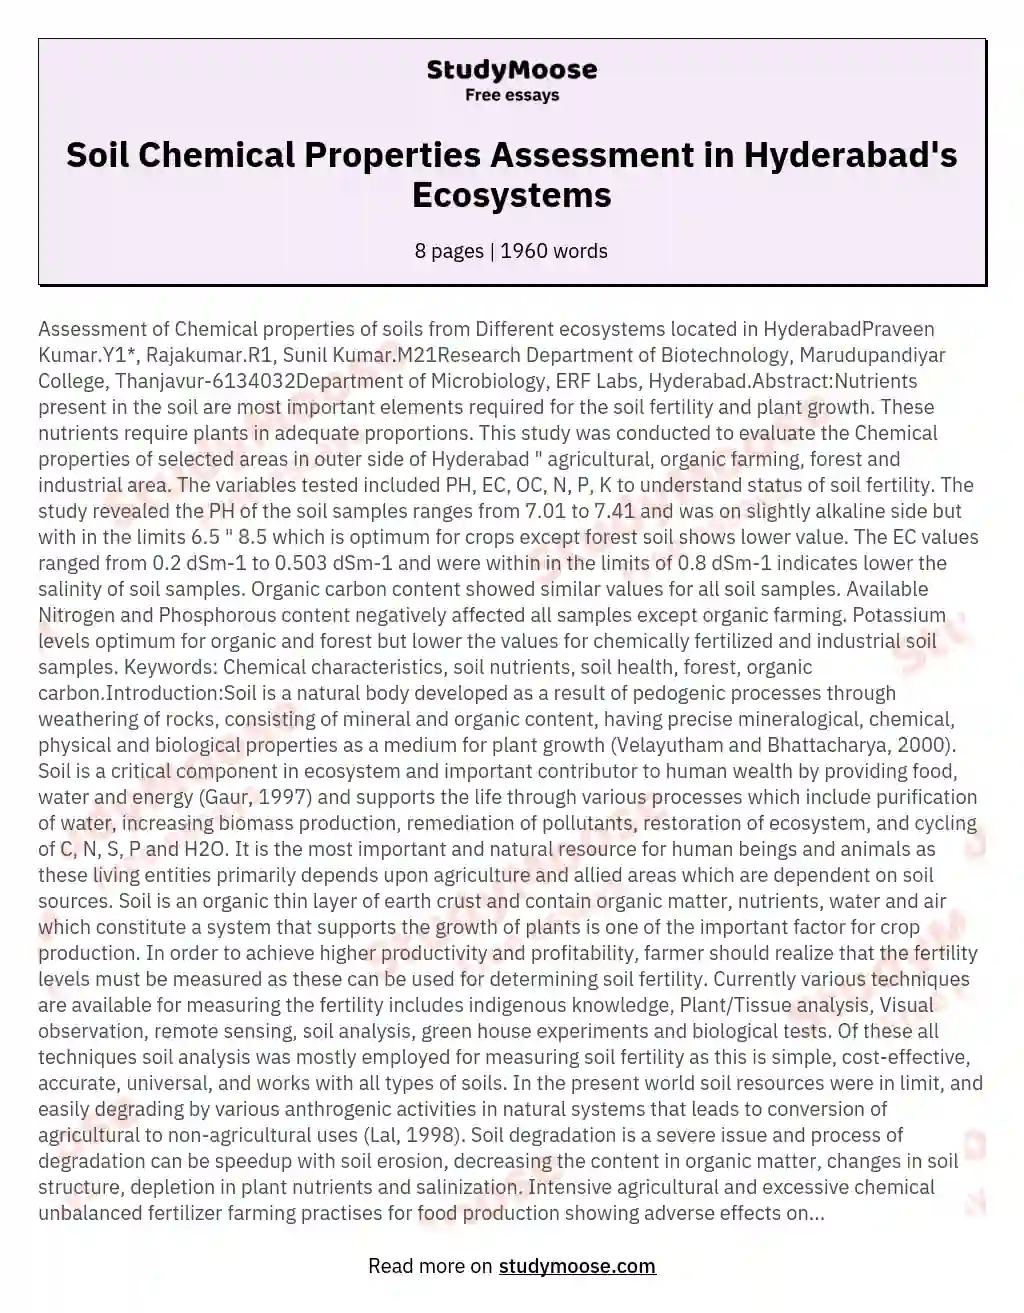 Soil Chemical Properties Assessment in Hyderabad's Ecosystems essay